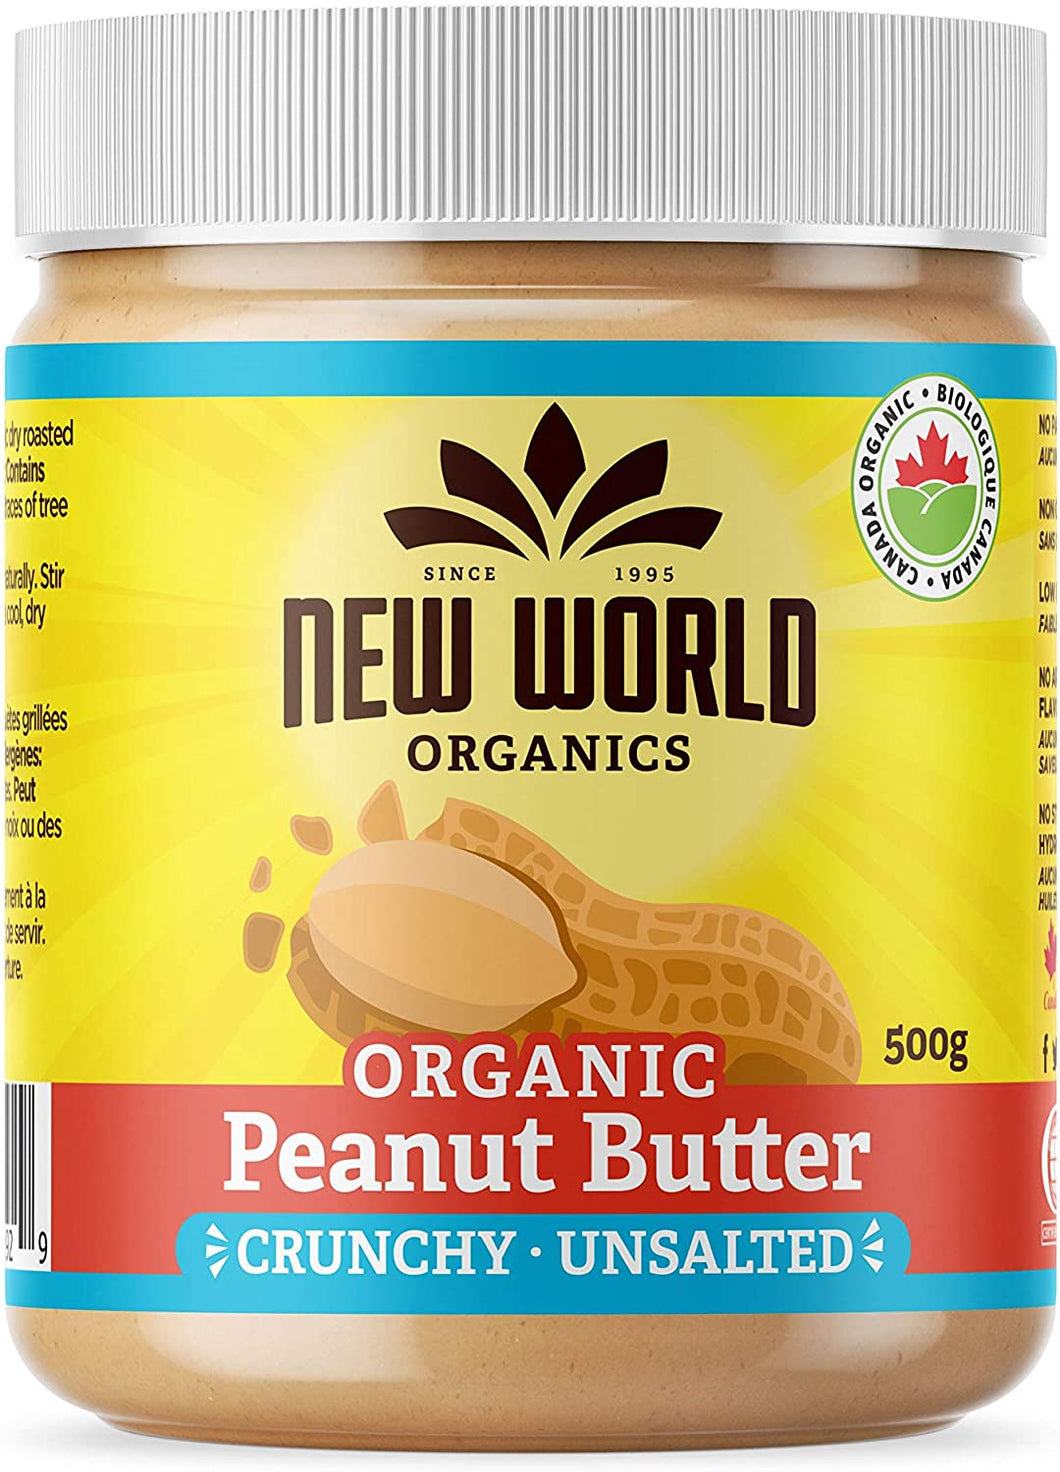 NW - Org. Peanut Butter Crunchy Unsalted (500g)